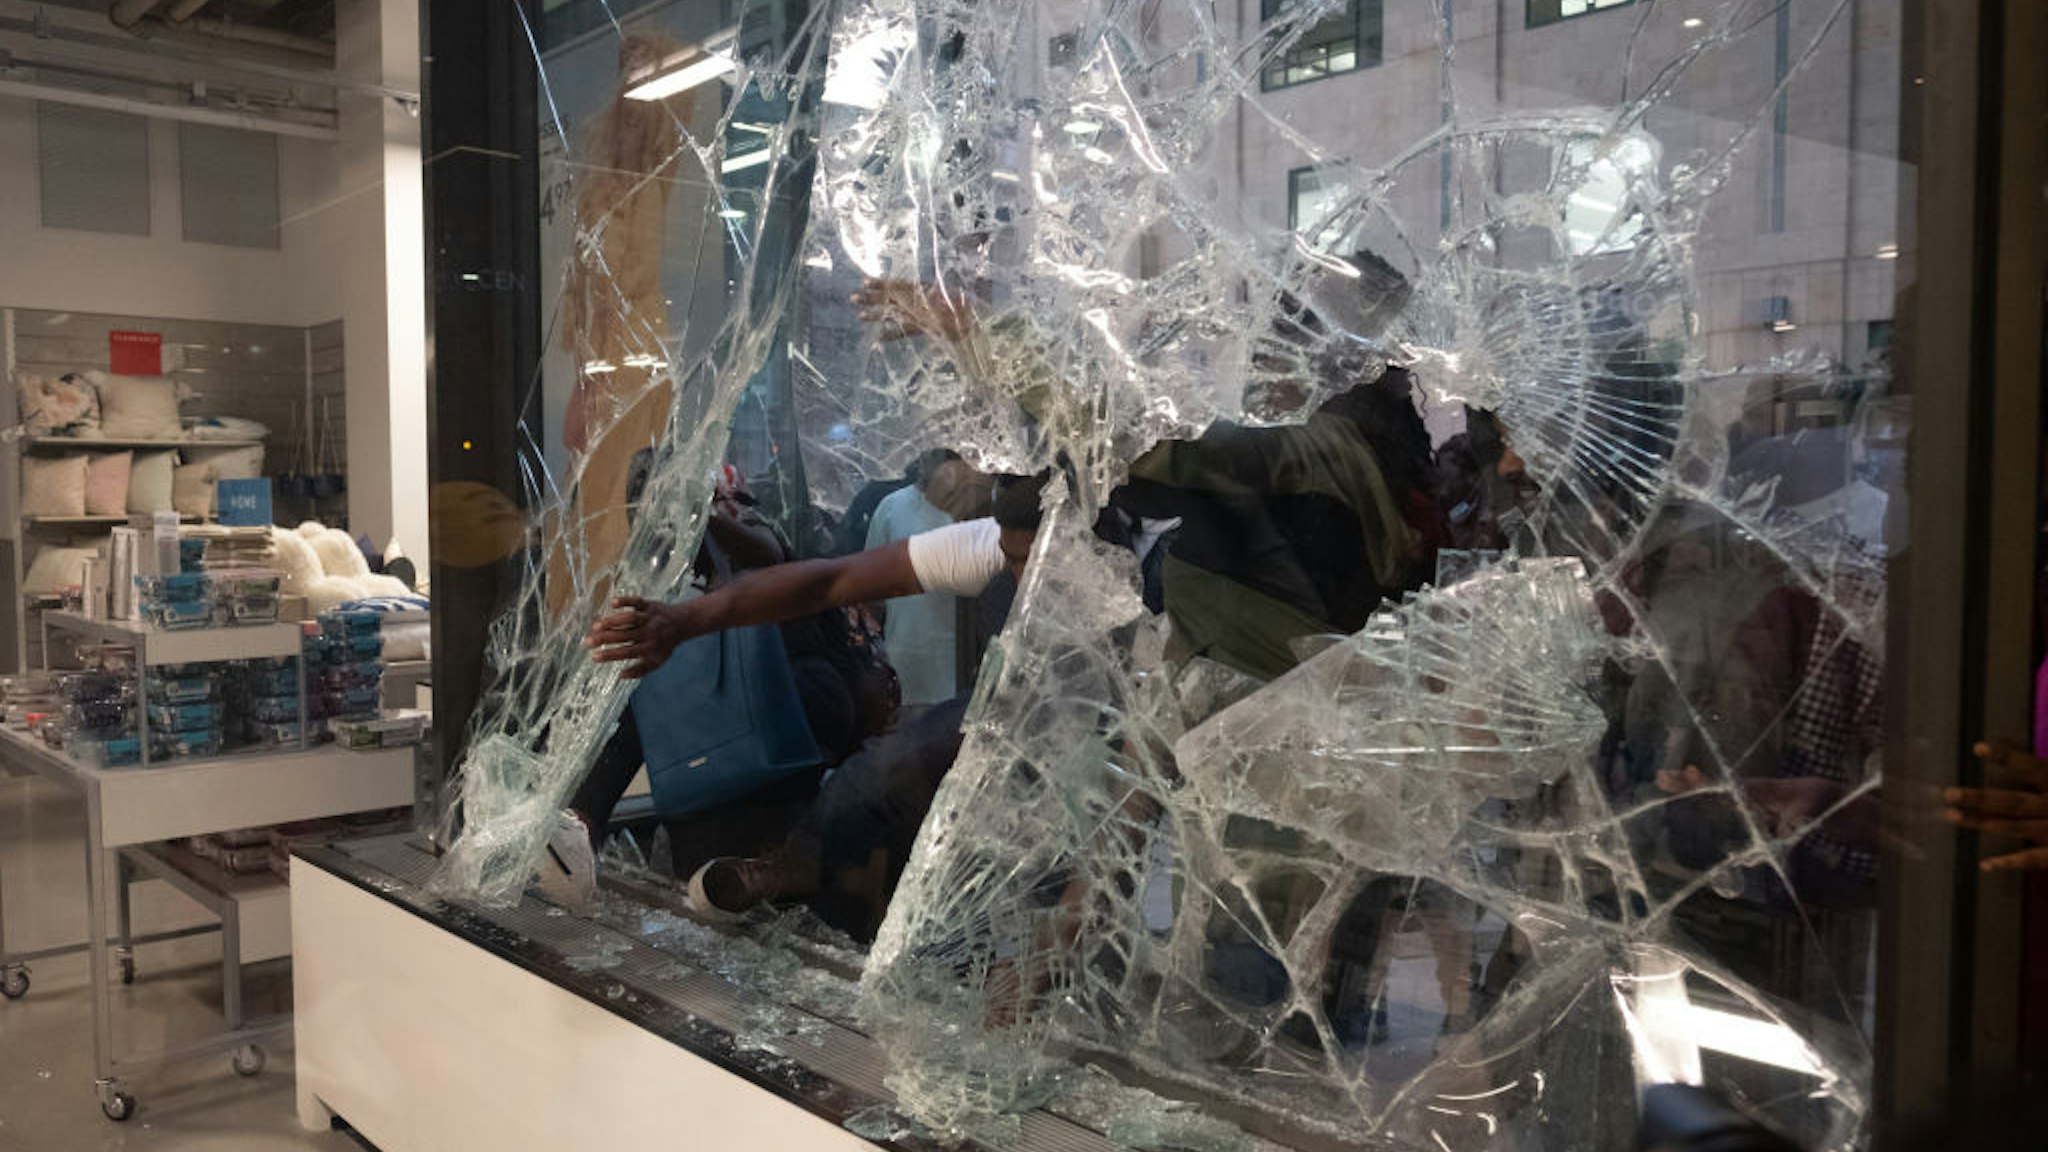 People break the glass of a Nordstrom store before stealing merchandise in downtown Minneapolis, US on August 26, 2020.